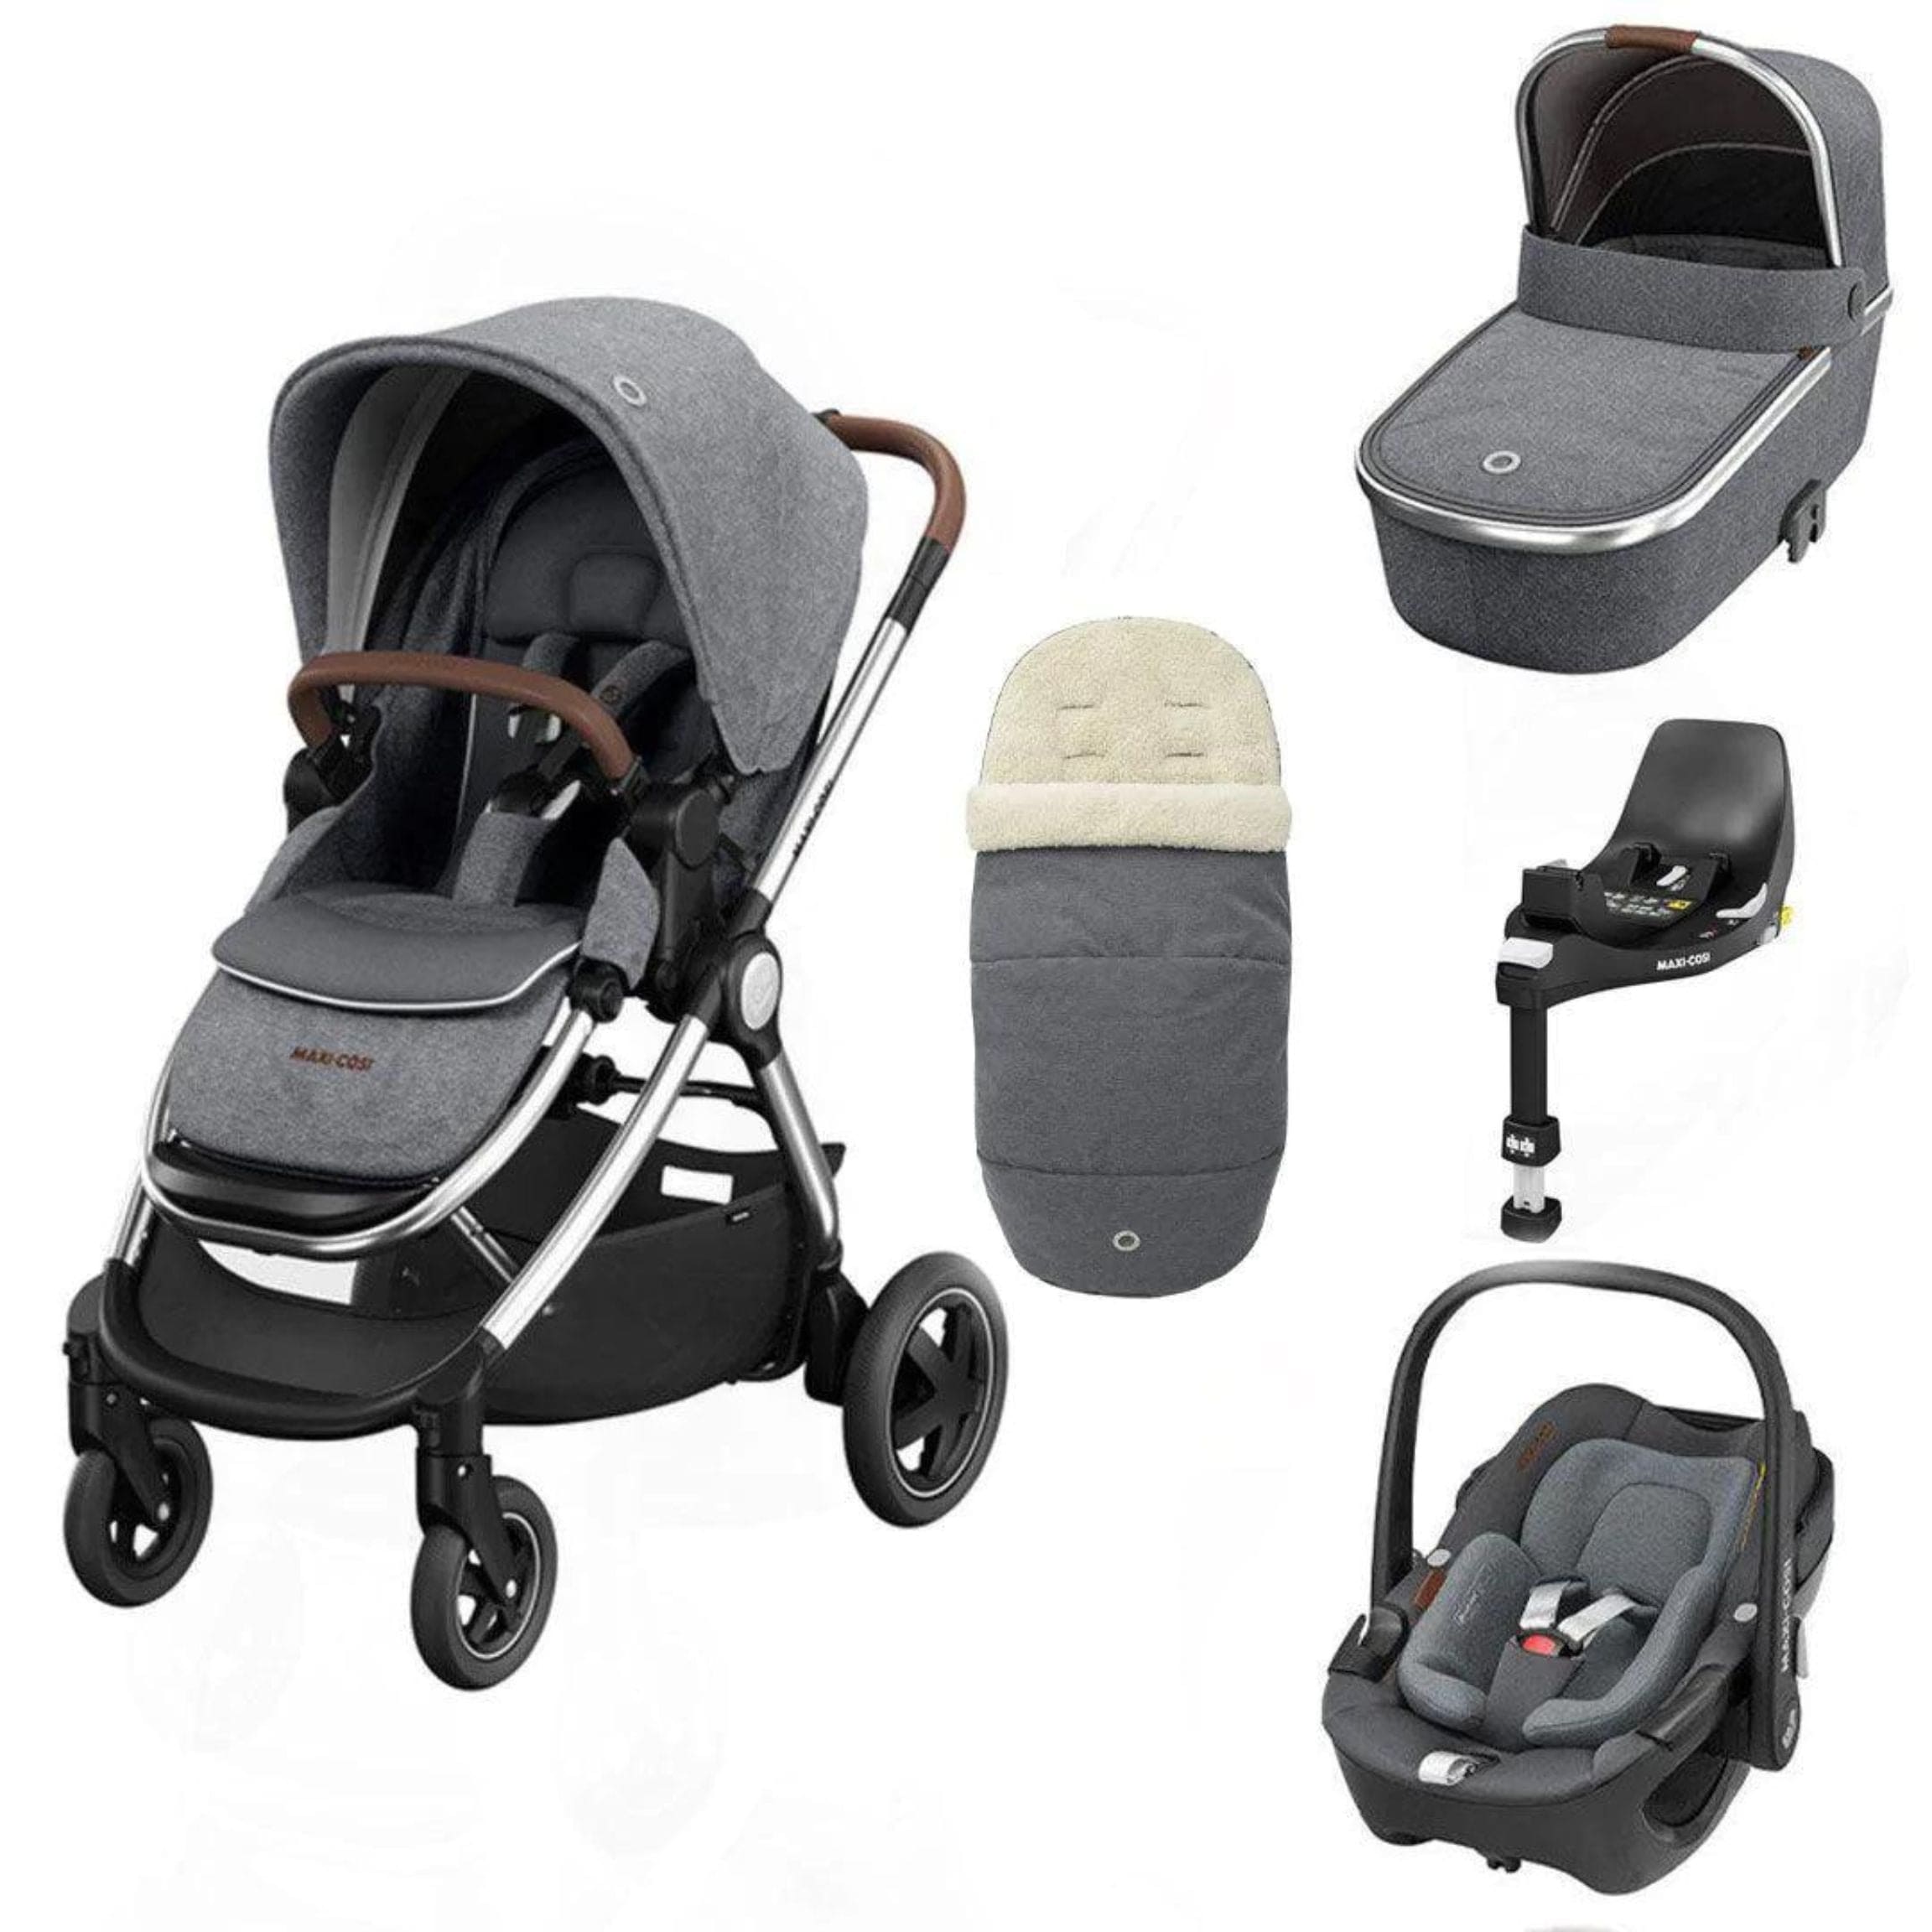 Maxi-Cosi Adorra Luxe Pebble 360 Travel System & Base in Twillic Grey Travel Systems KF51400000 3220660326686